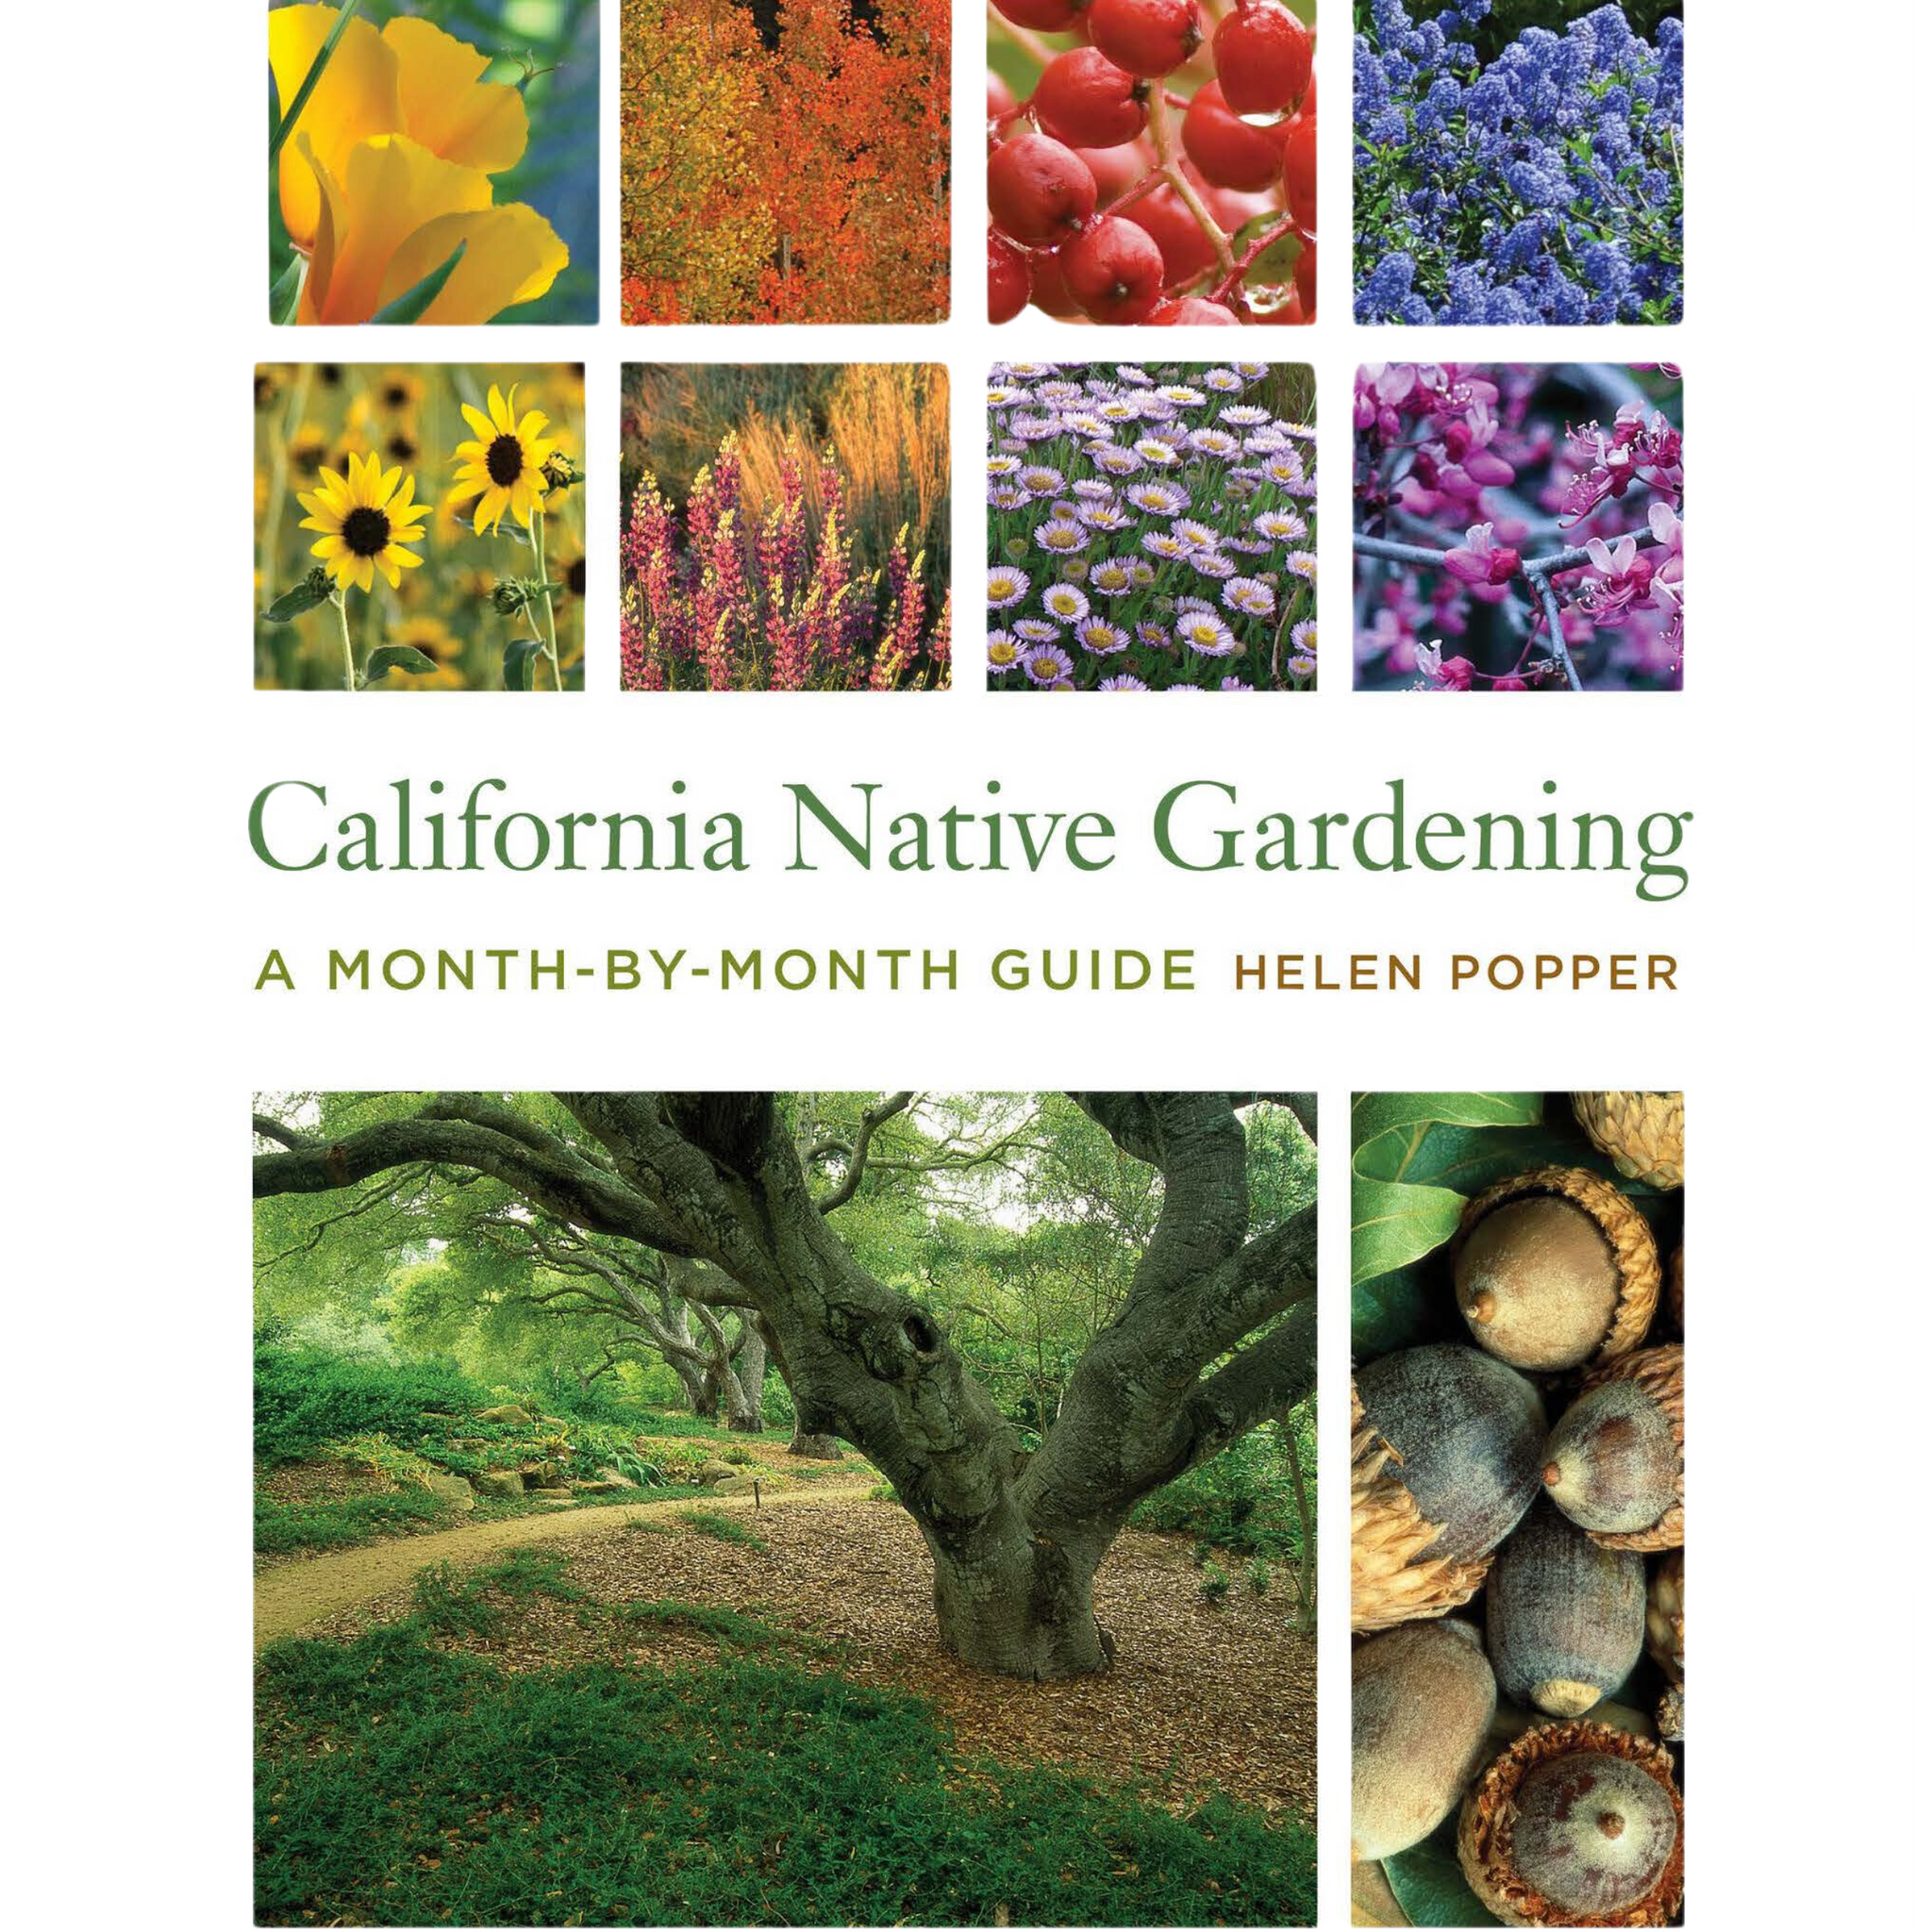 California Native Gardening - A Month-by-Month Guide